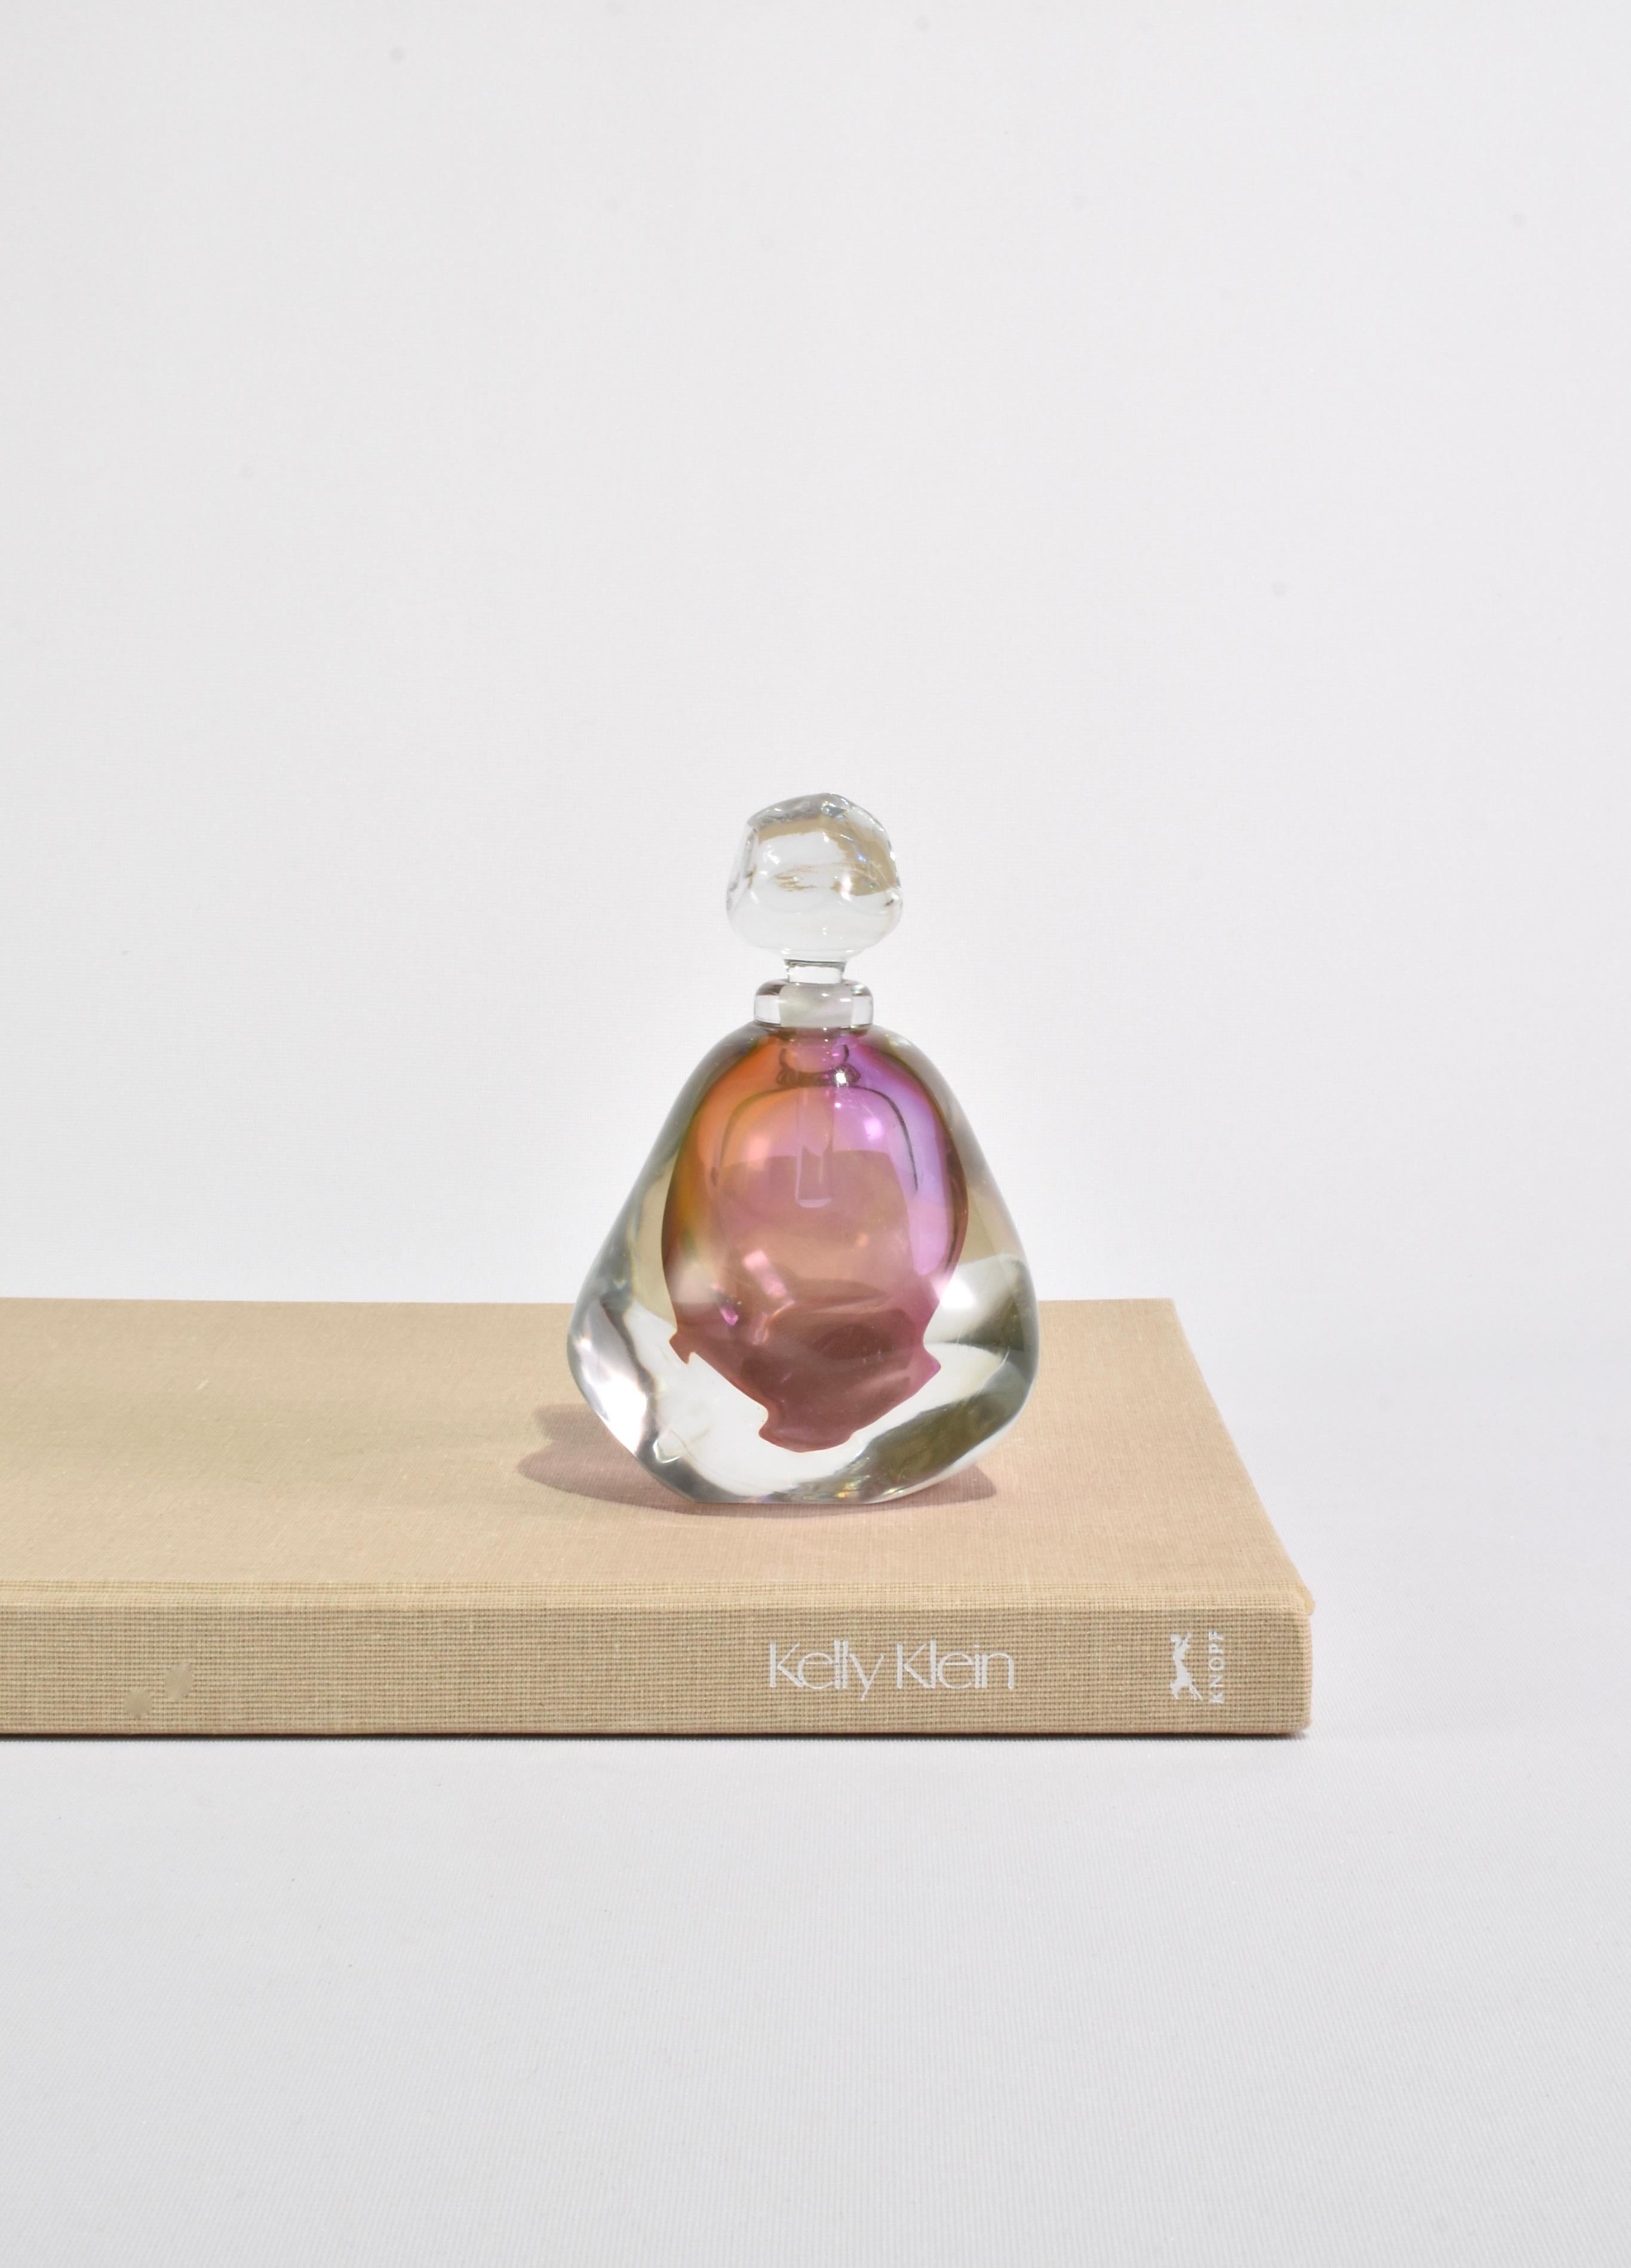 Stunning, colorful blown glass perfume bottle in an organic shape. Not signed, attributed to Leon Applebaum.